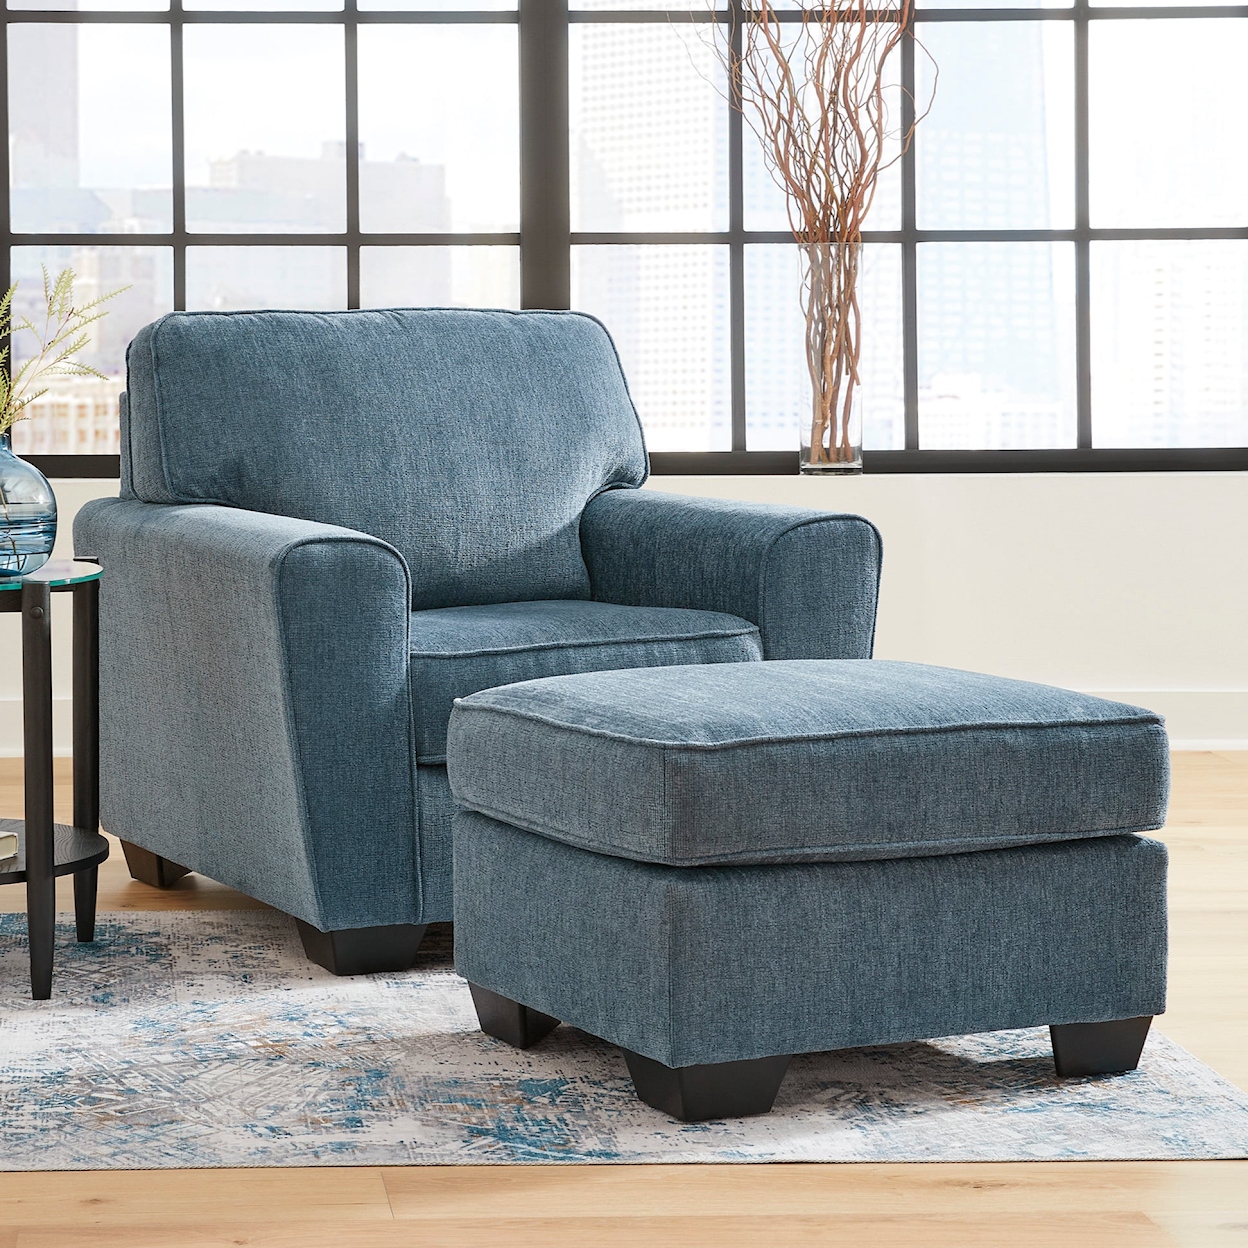 Signature Design by Ashley Furniture Cashton Chair and Ottoman